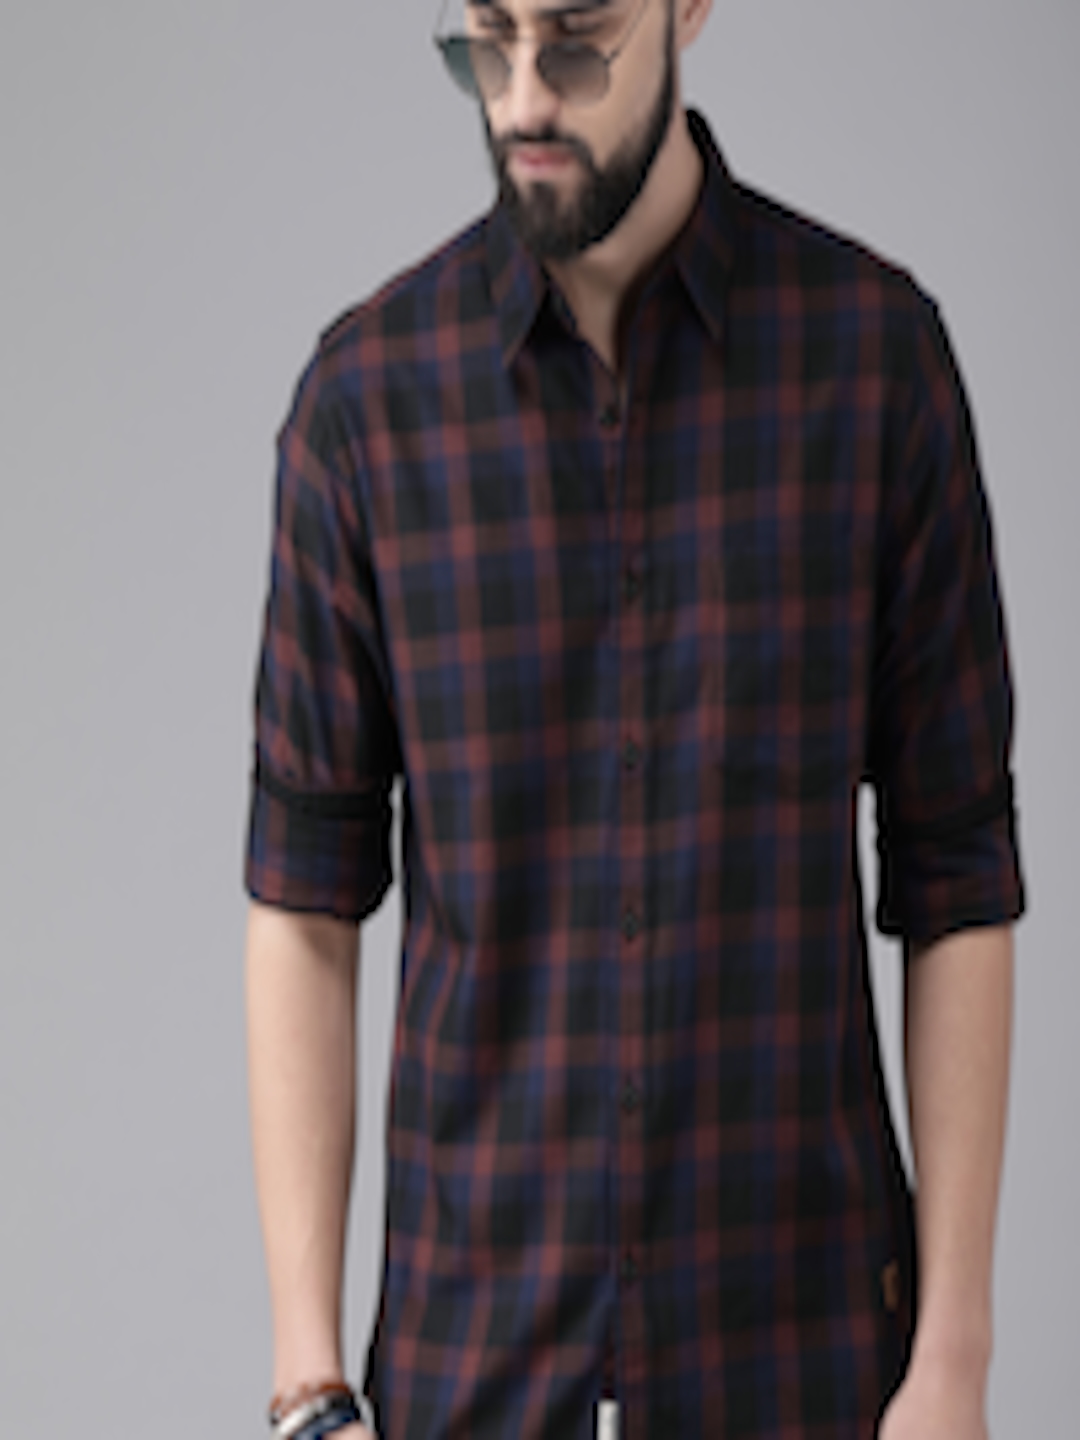 Buy The Roadster Lifestyle Co Men Black & Maroon Checked Pure Cotton ...